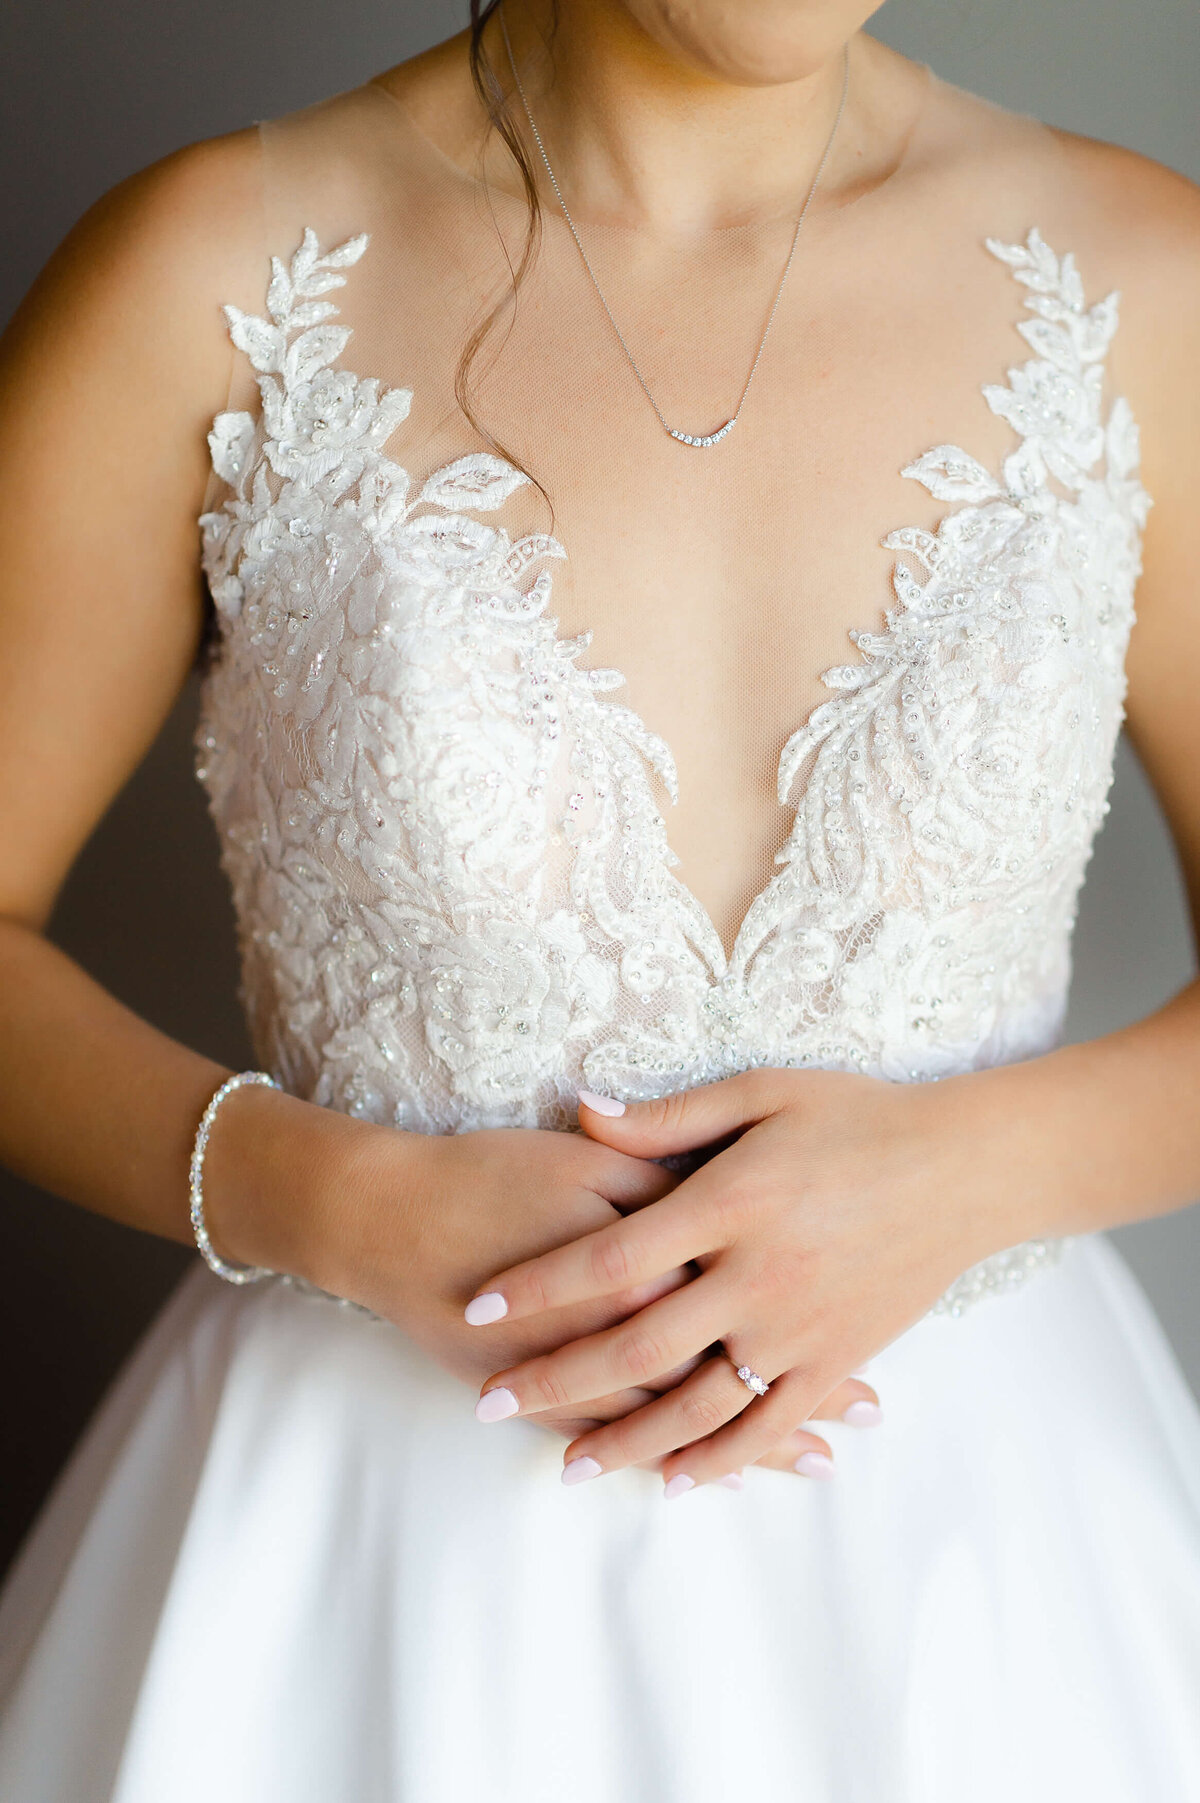 Ottawa wedding photography showing the close up details of a bride's gown, bracelet and engagement ring taken at the Brookstreet Hotel